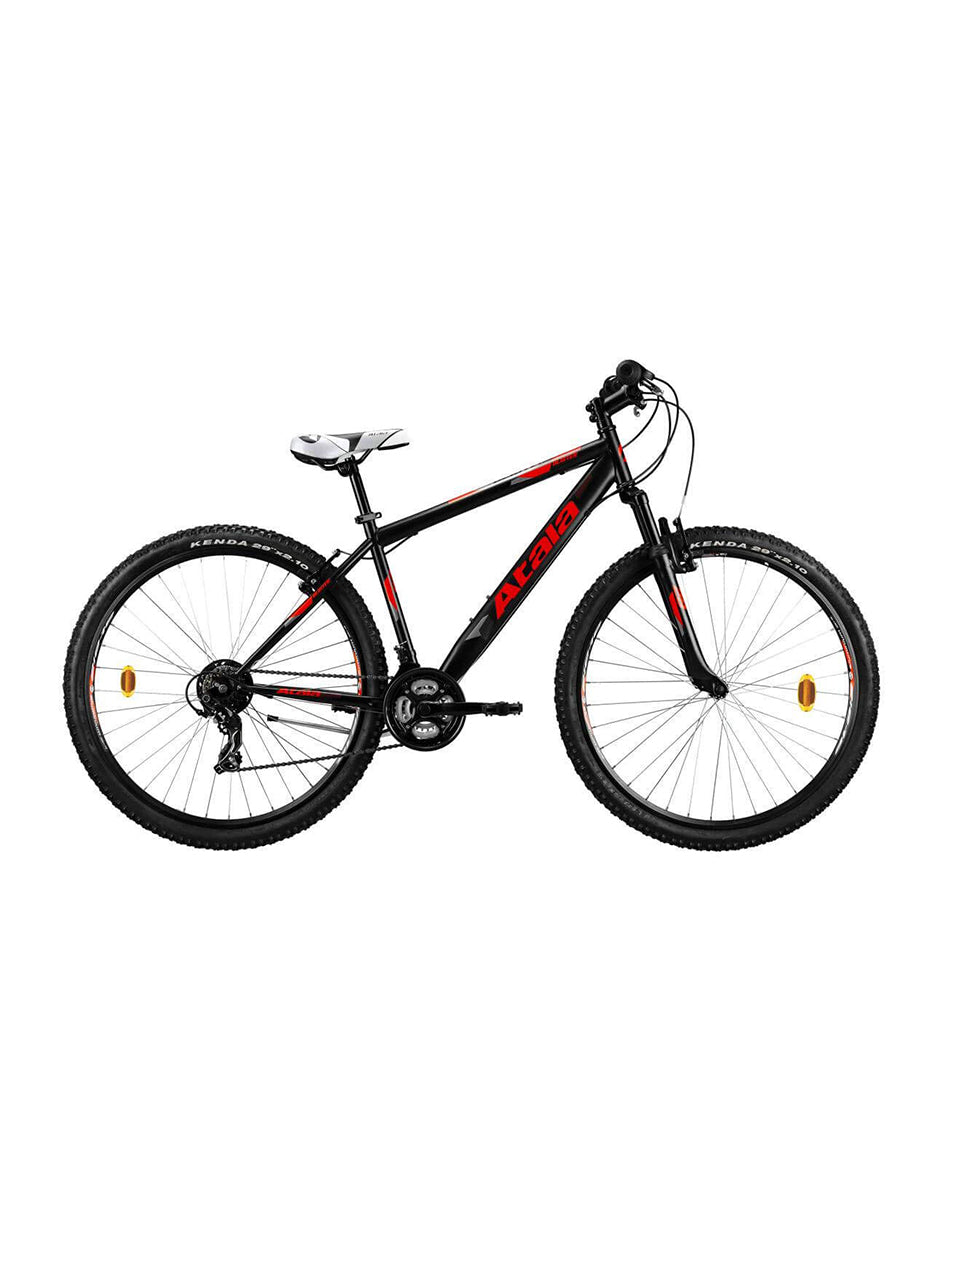 Atala Bicycle Planet Hd 27.5L, Black Or Red Large